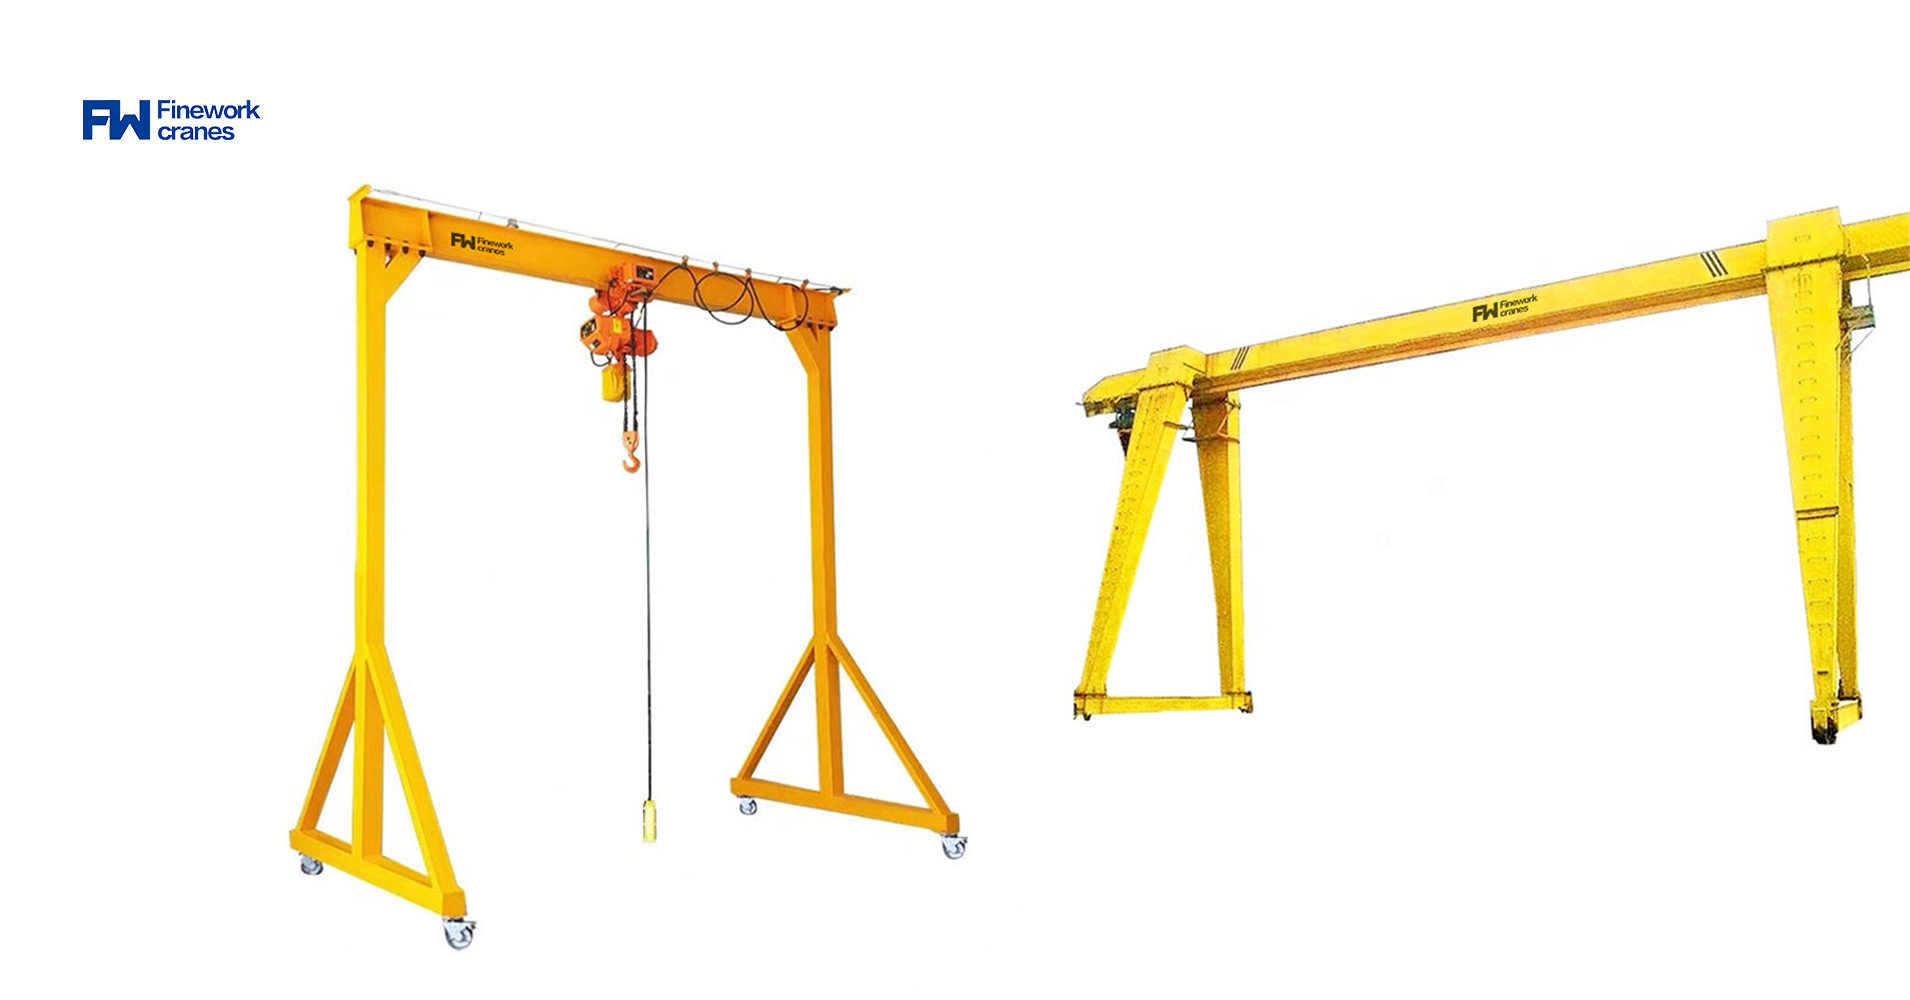 Gantry Crane Load up to 50ton, Span up to 35m, Low noise, Safe & Easy to Disassembly.